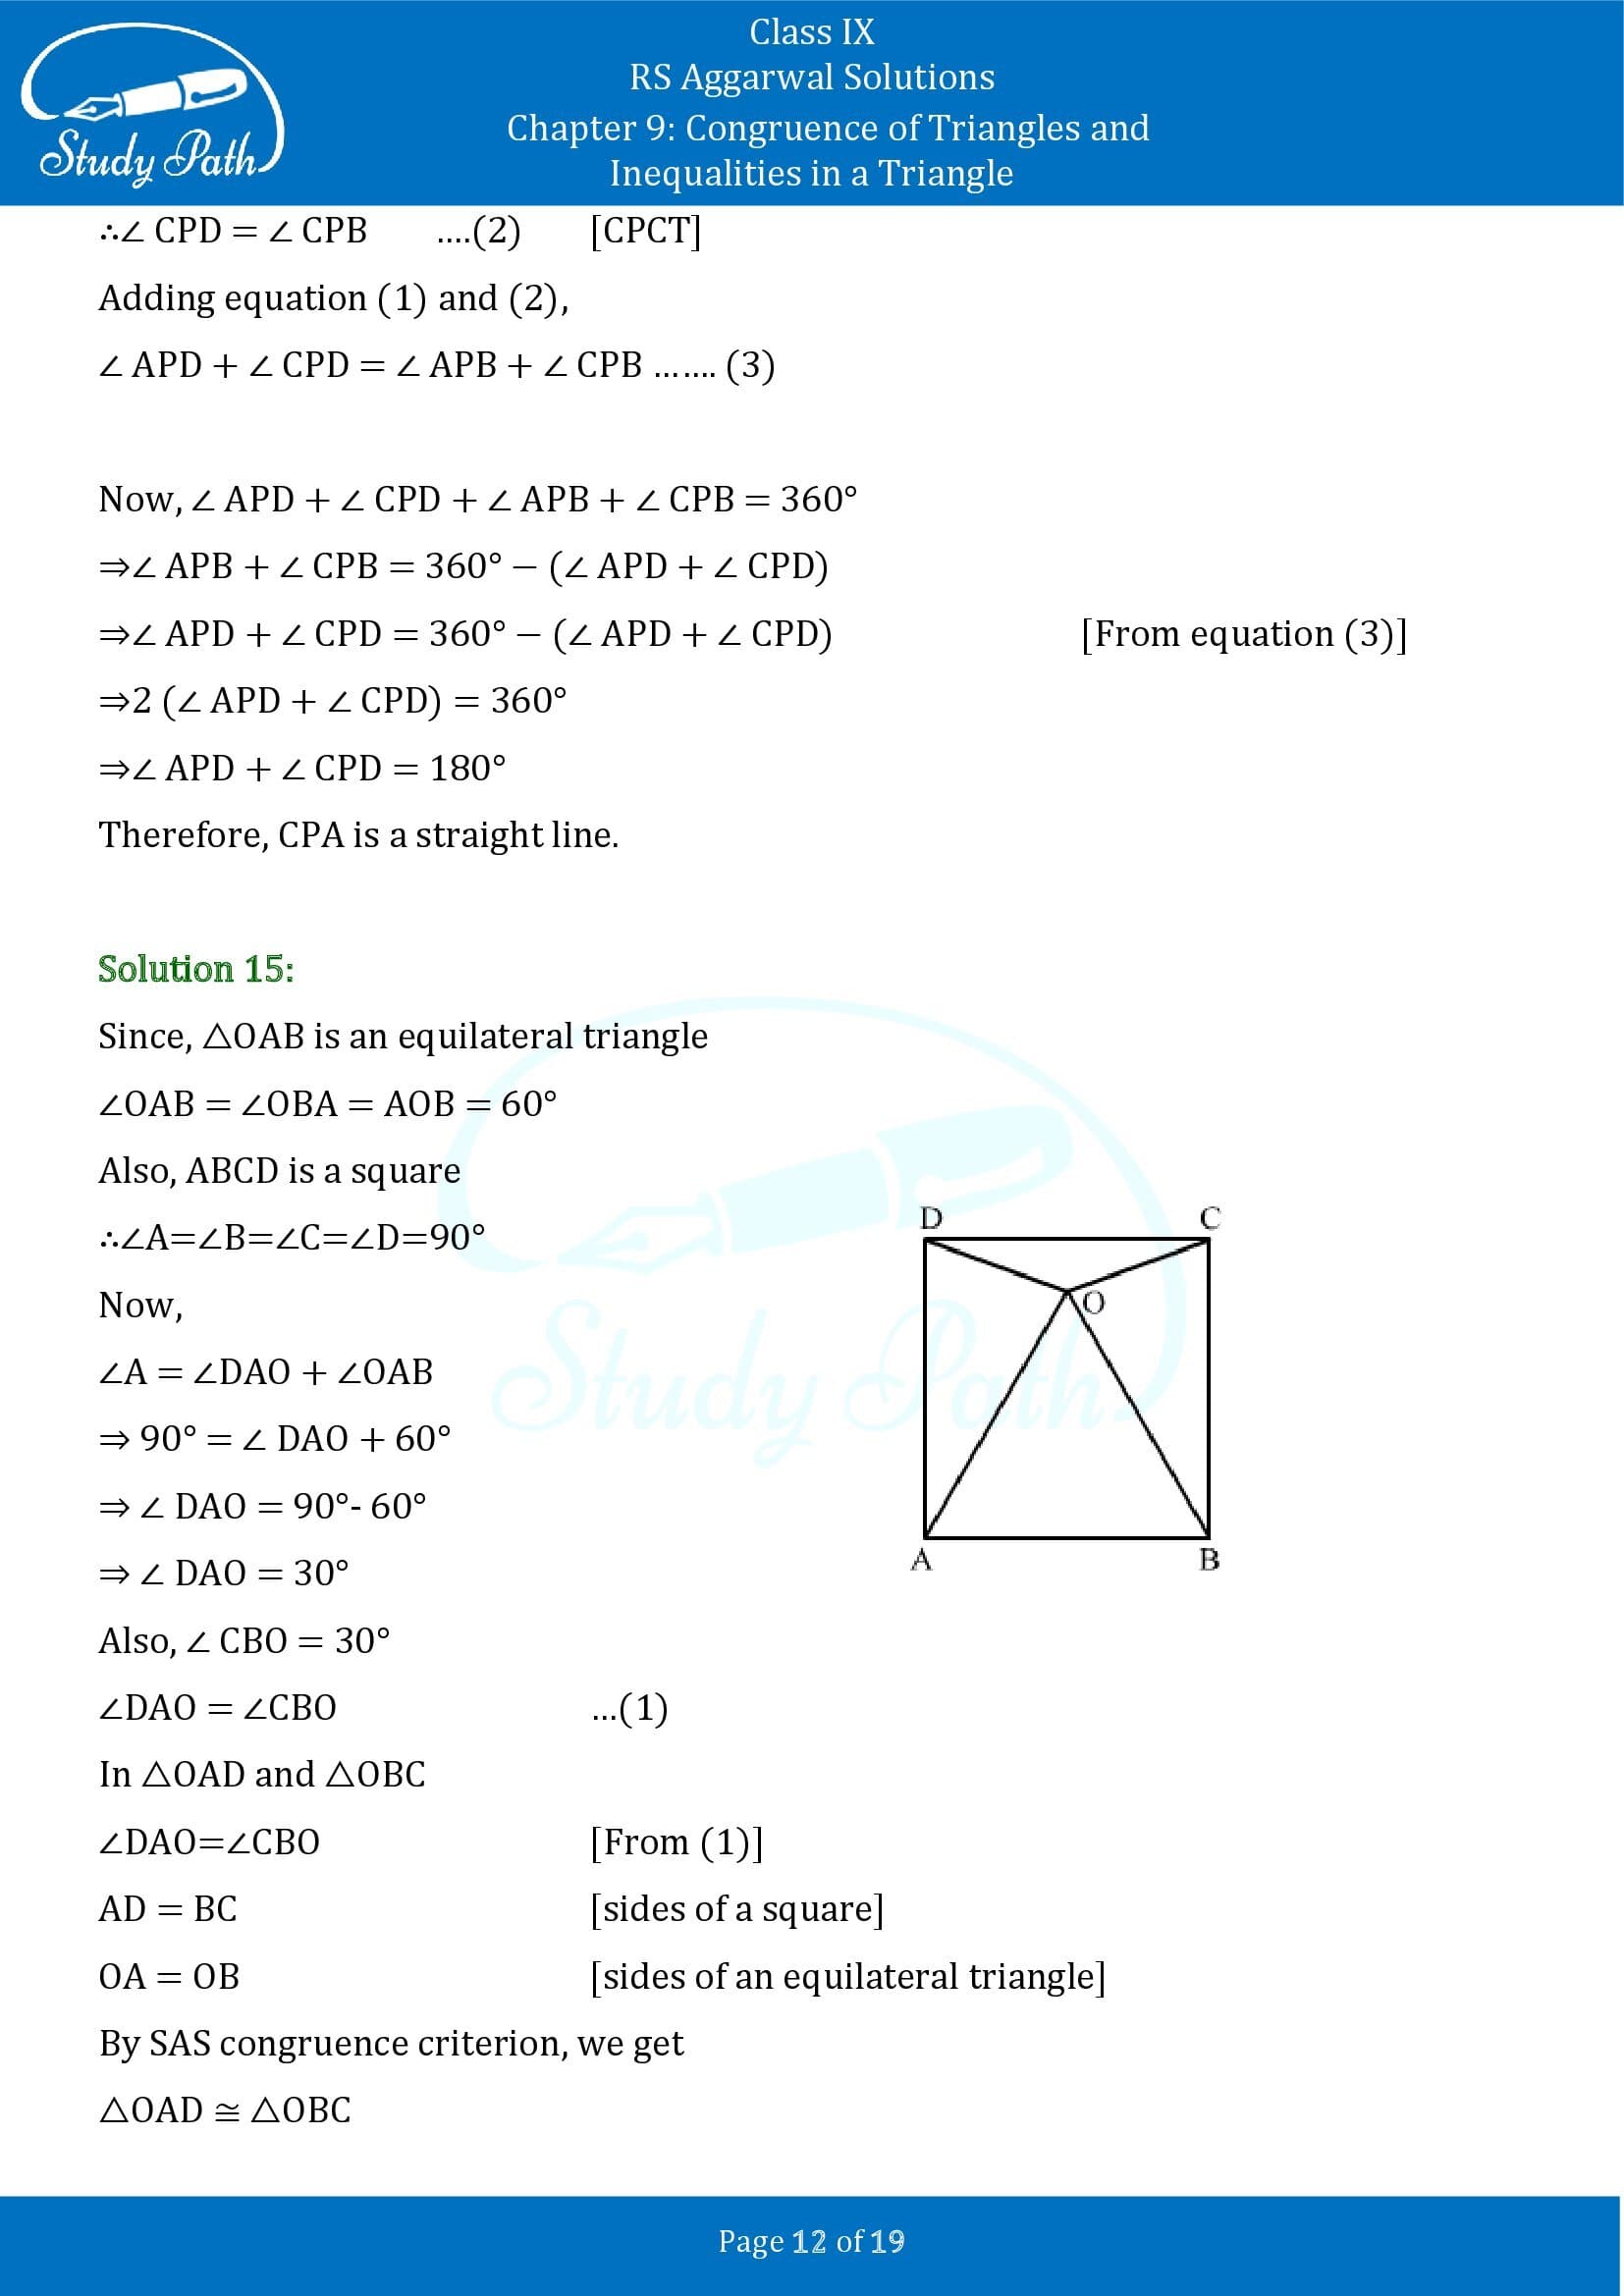 RS Aggarwal Solutions Class 9 Chapter 9 Congruence of Triangles and Inequalities in a Triangle Exercise 9A 0012